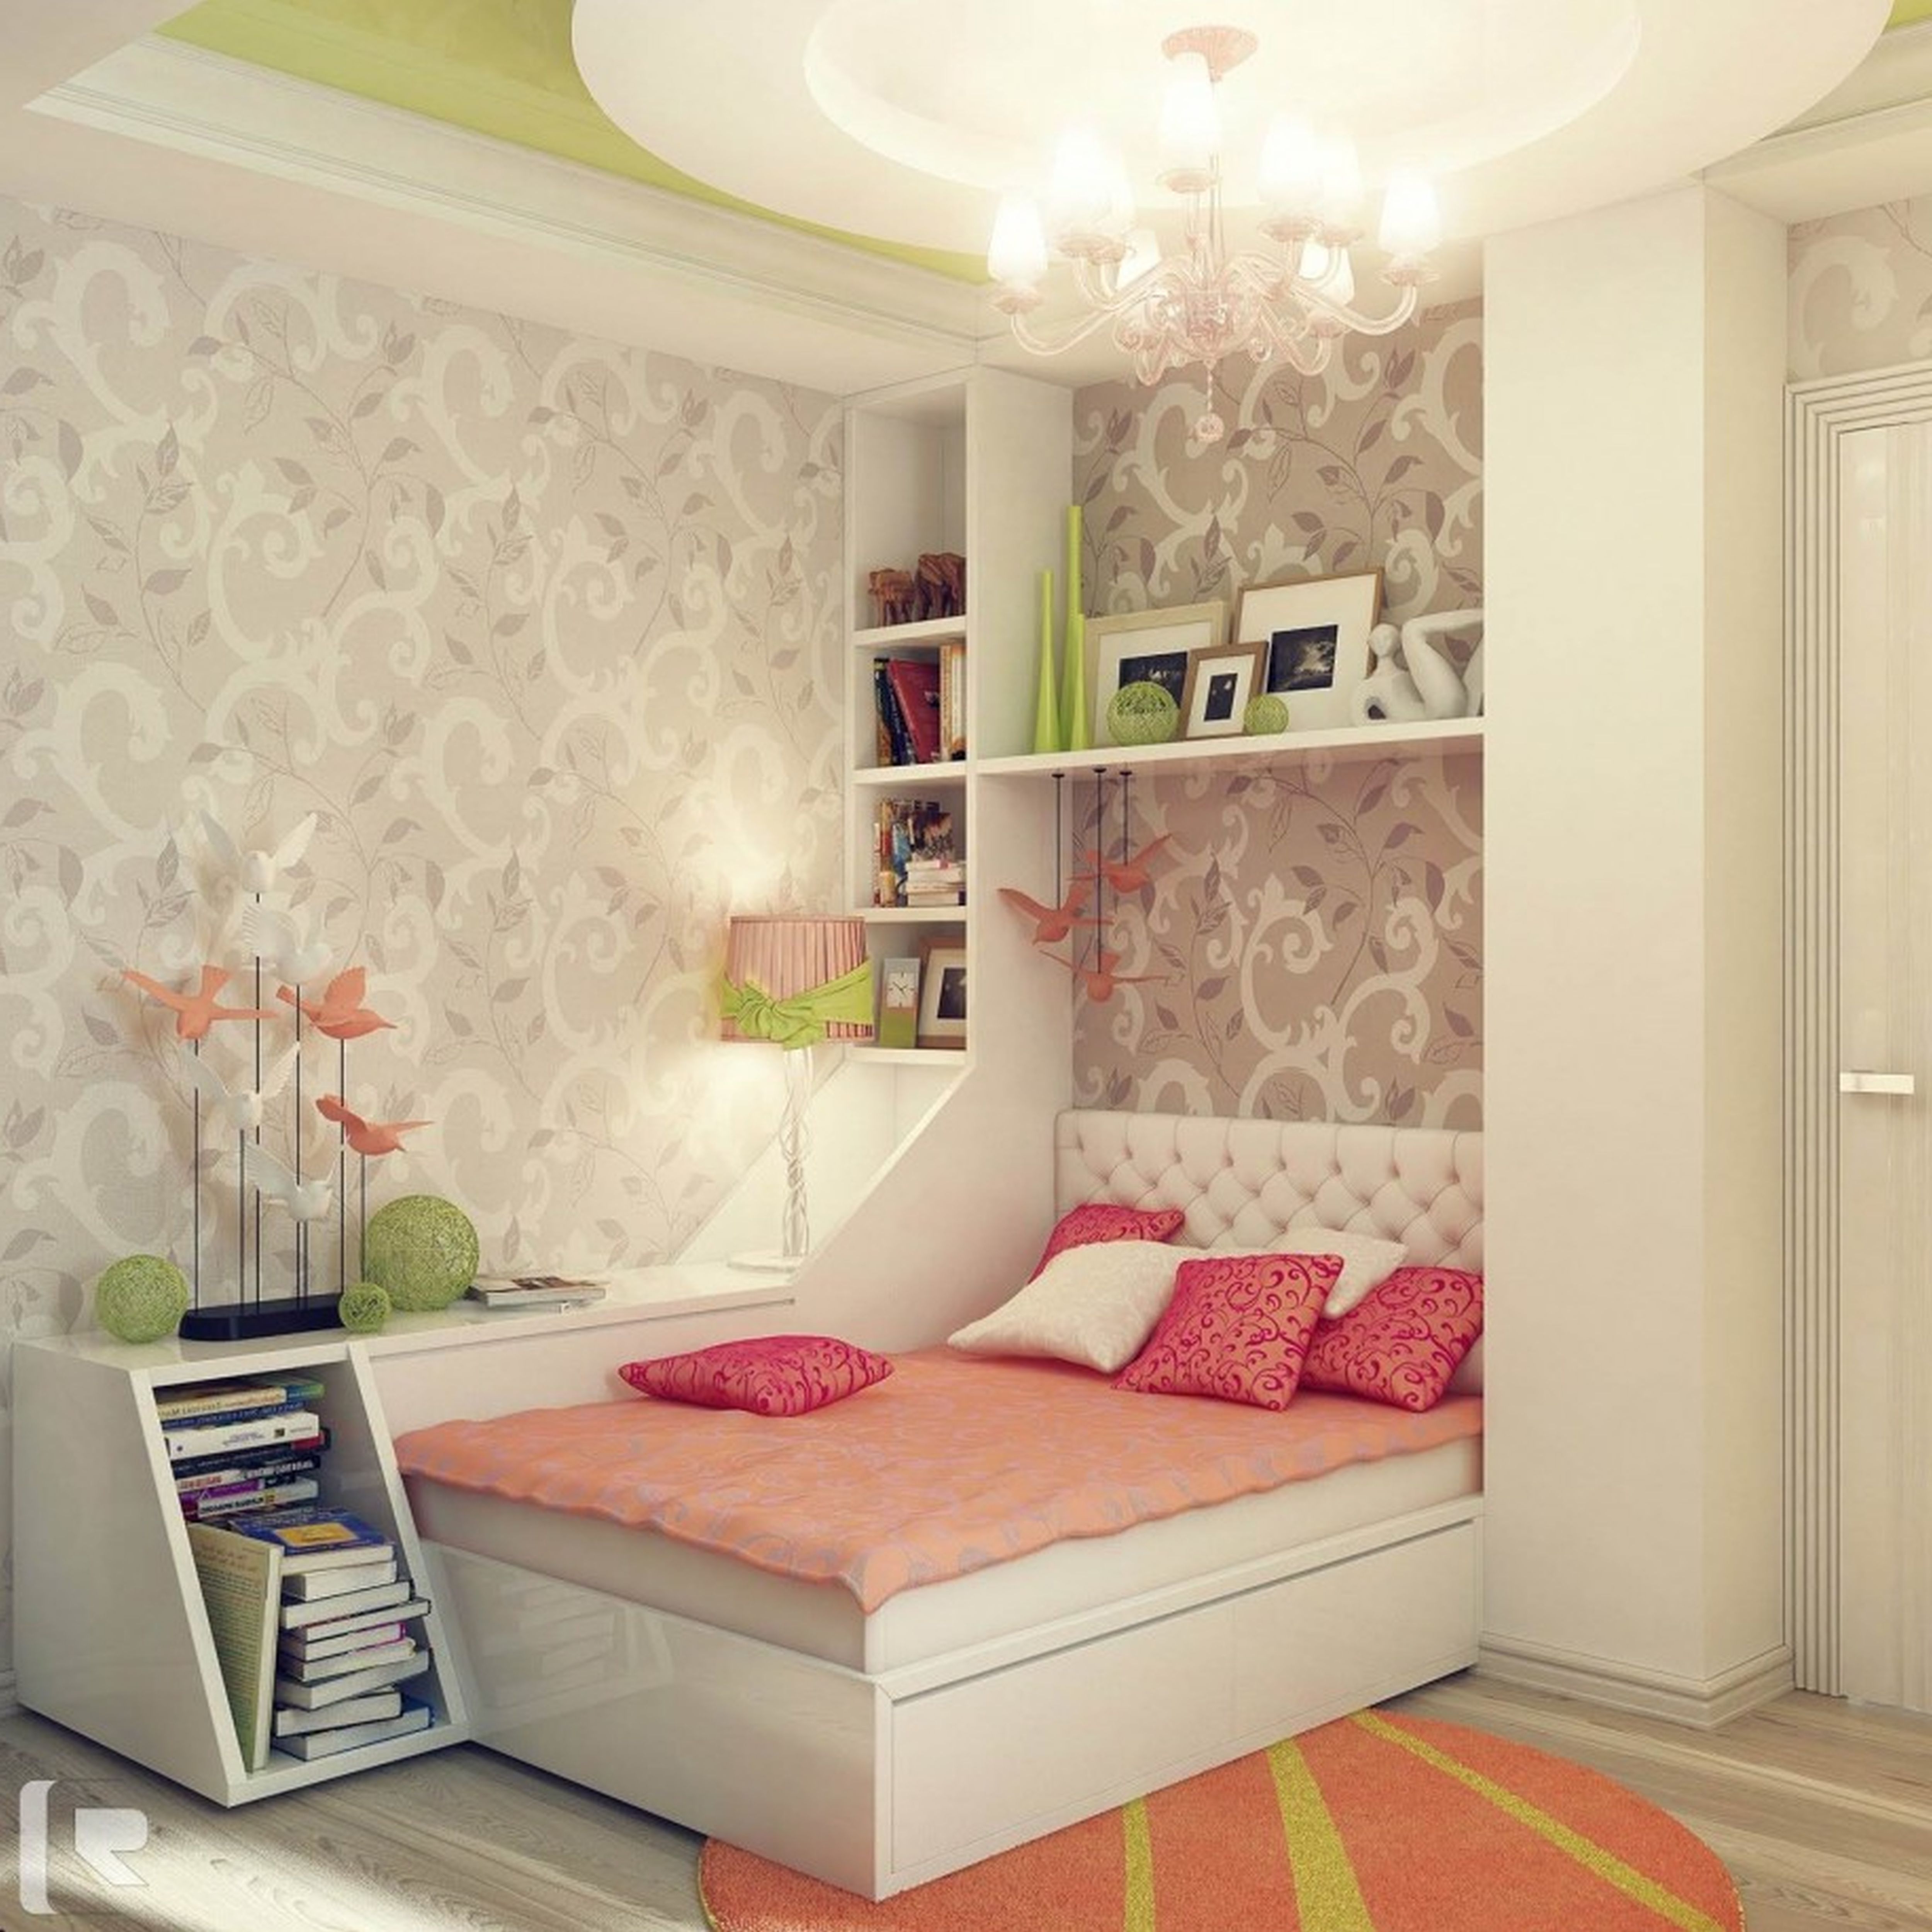 Decoration Cute Room Decor Ideas For Teenage Girl Painting Design